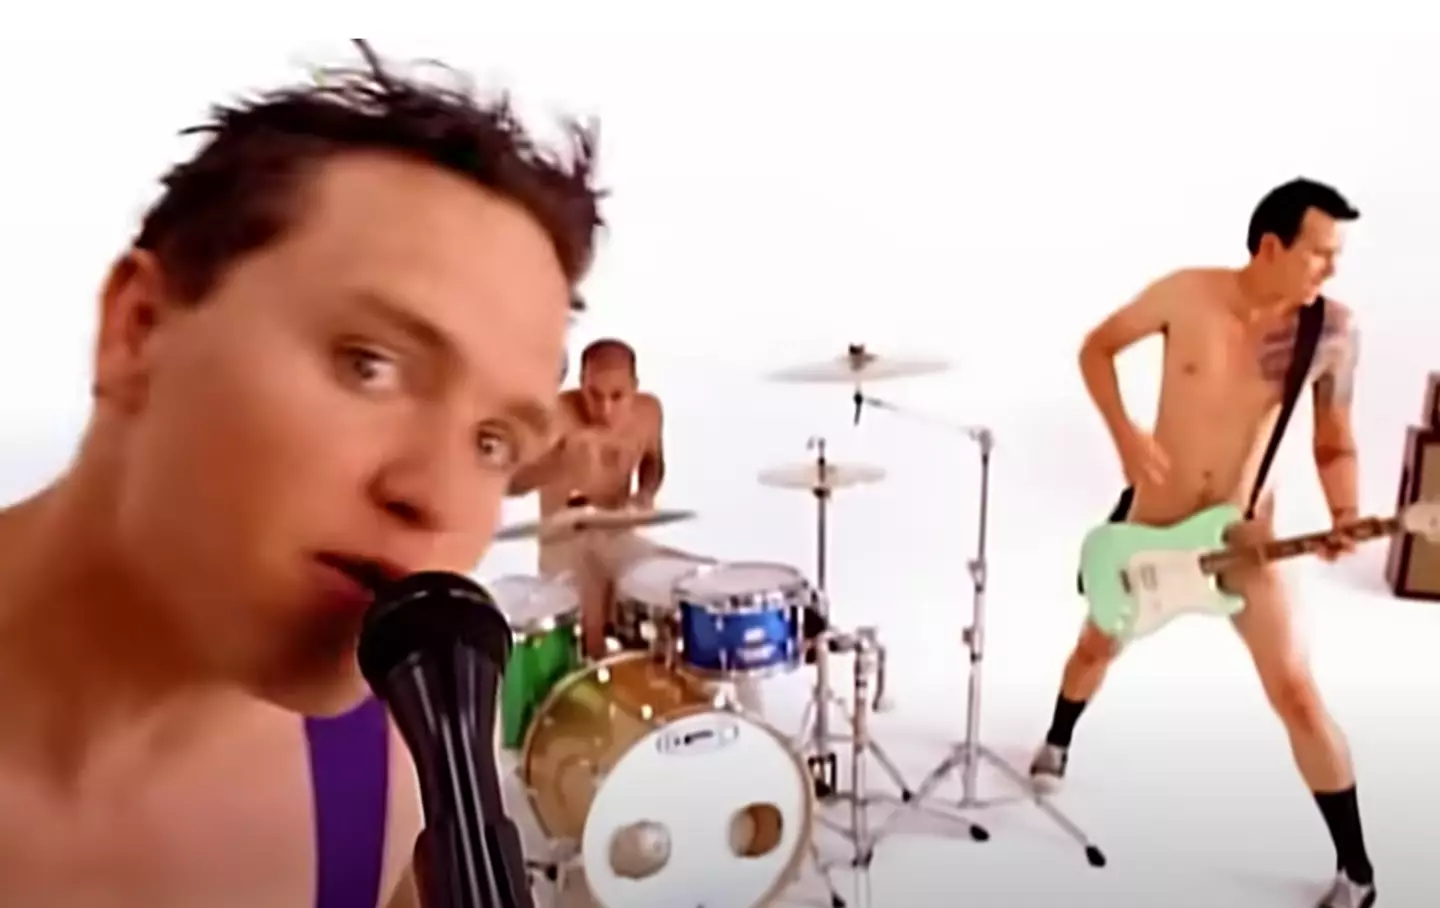 Blink-182 fans found out that many of them had been singing the wrong lyrics for 23 years.